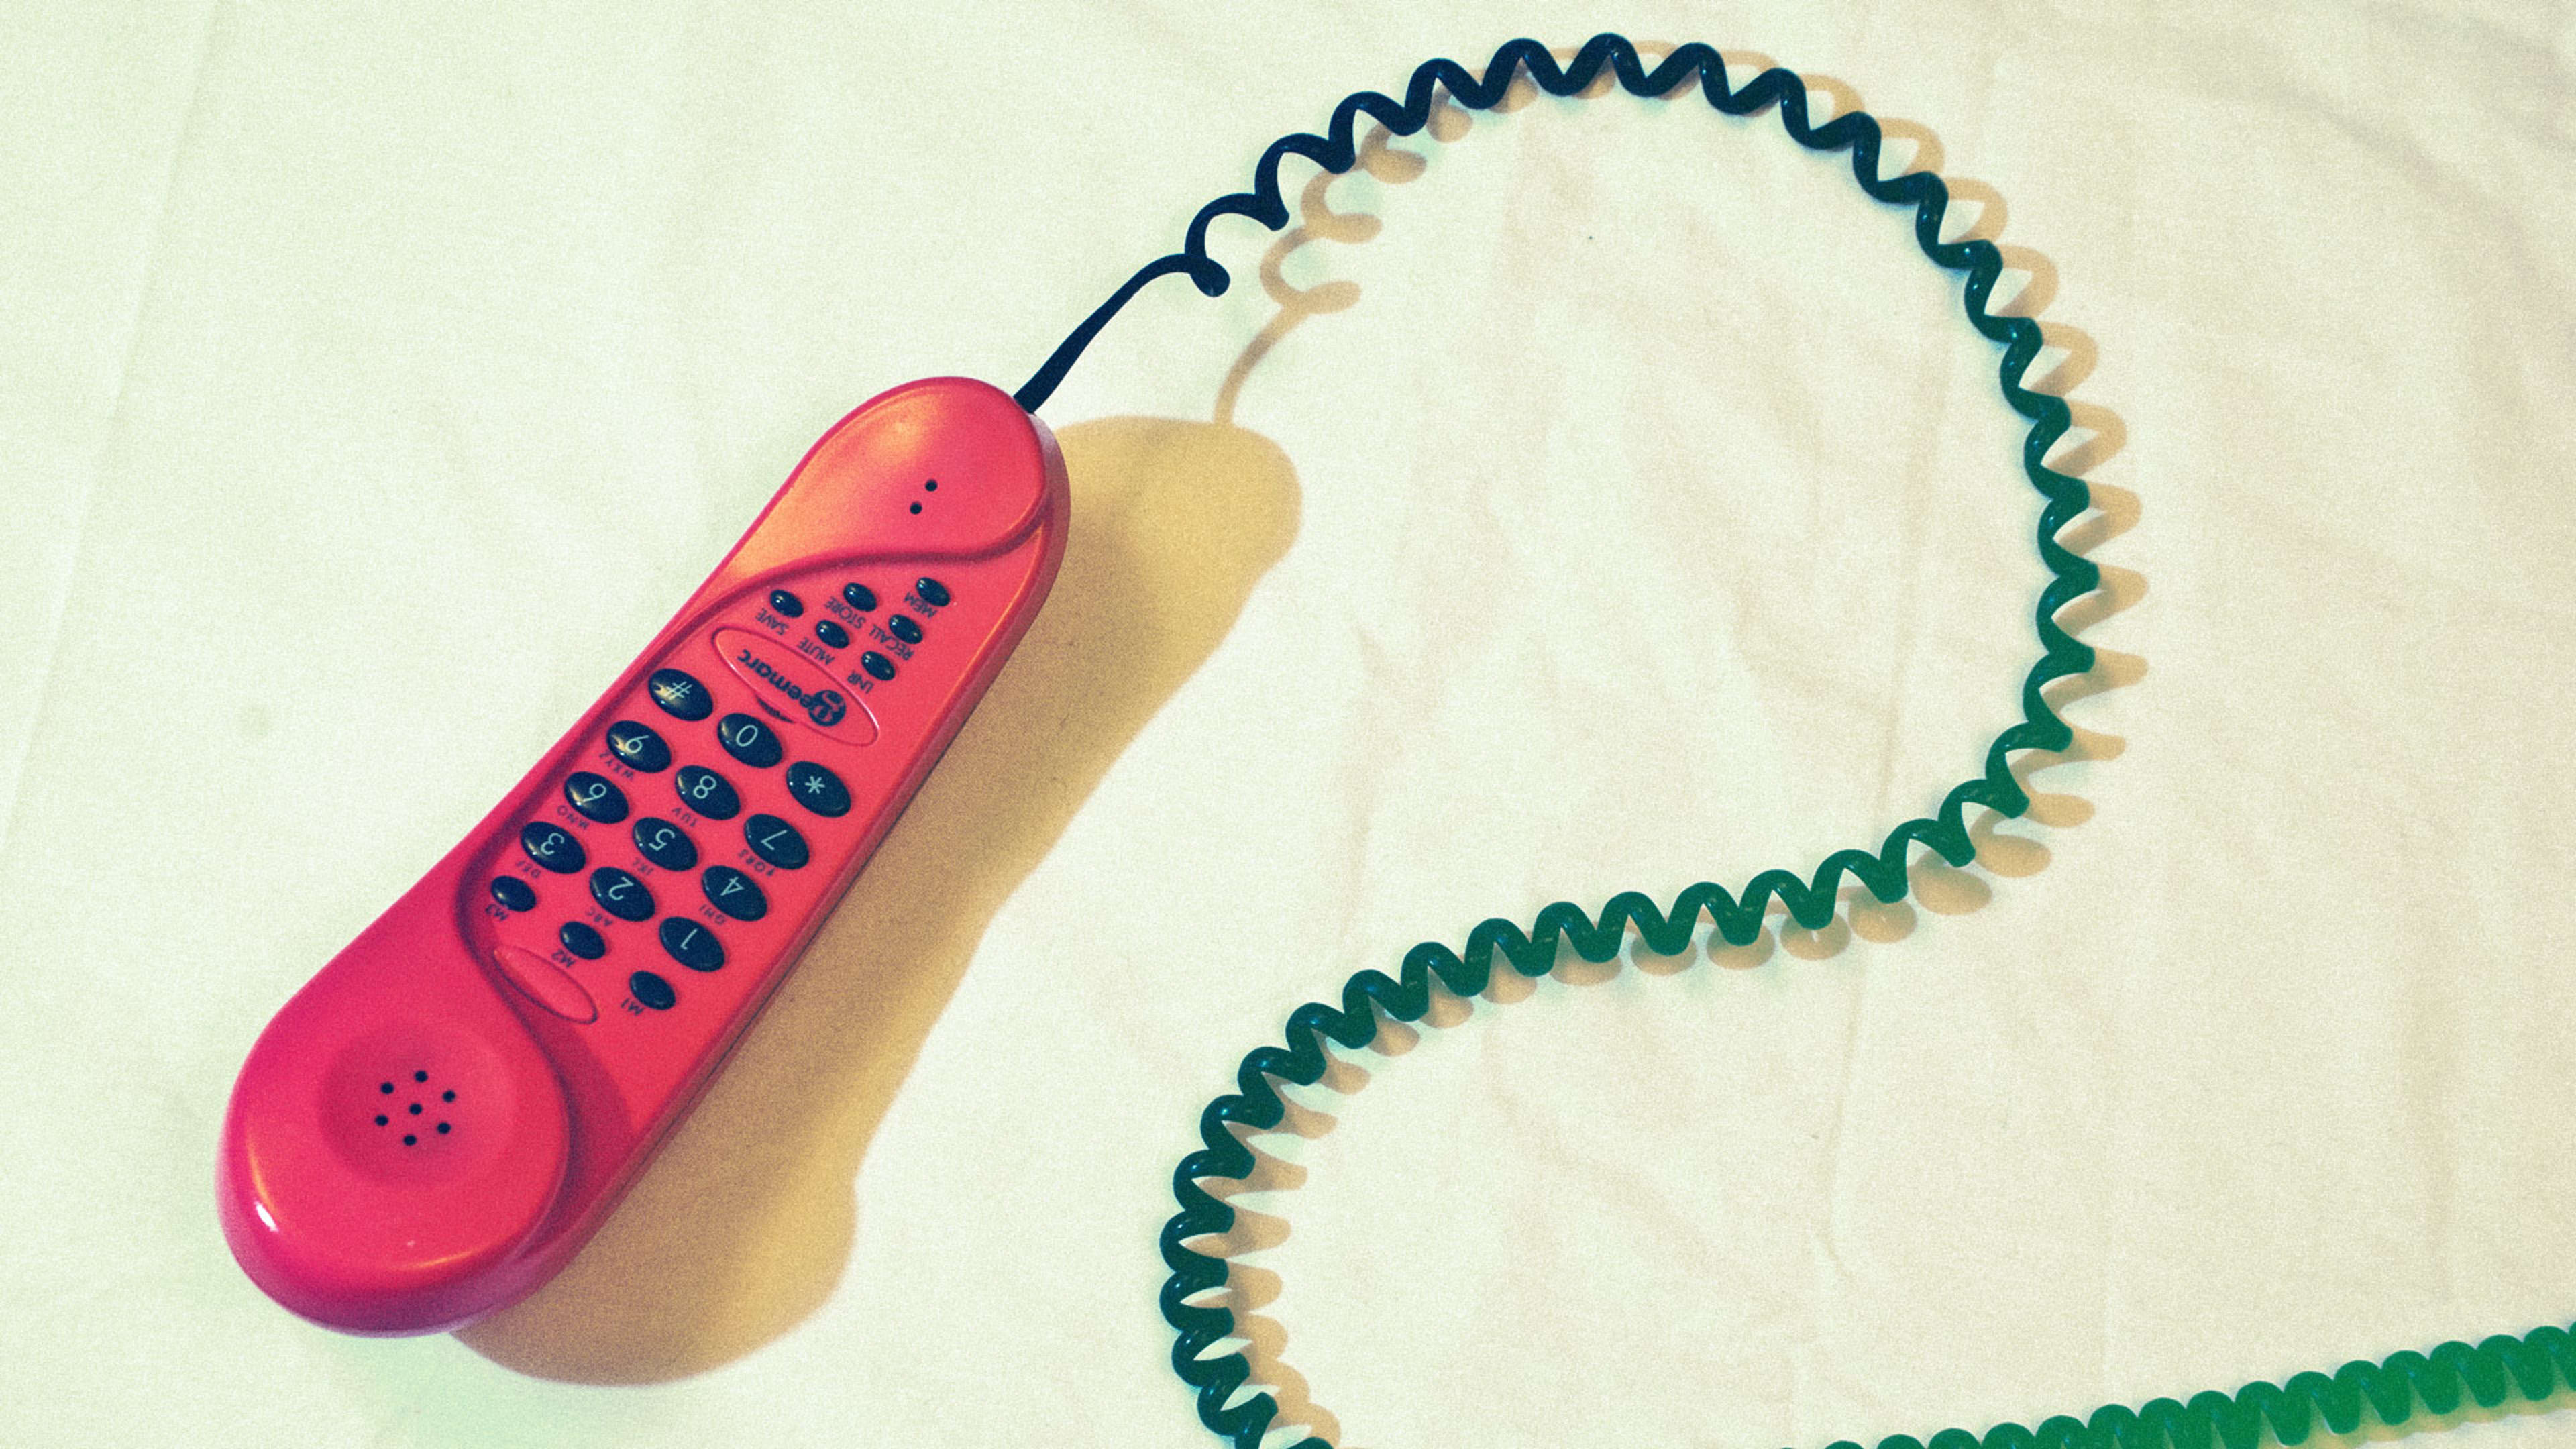 Why the phone call is your best channel for connection while socially distant